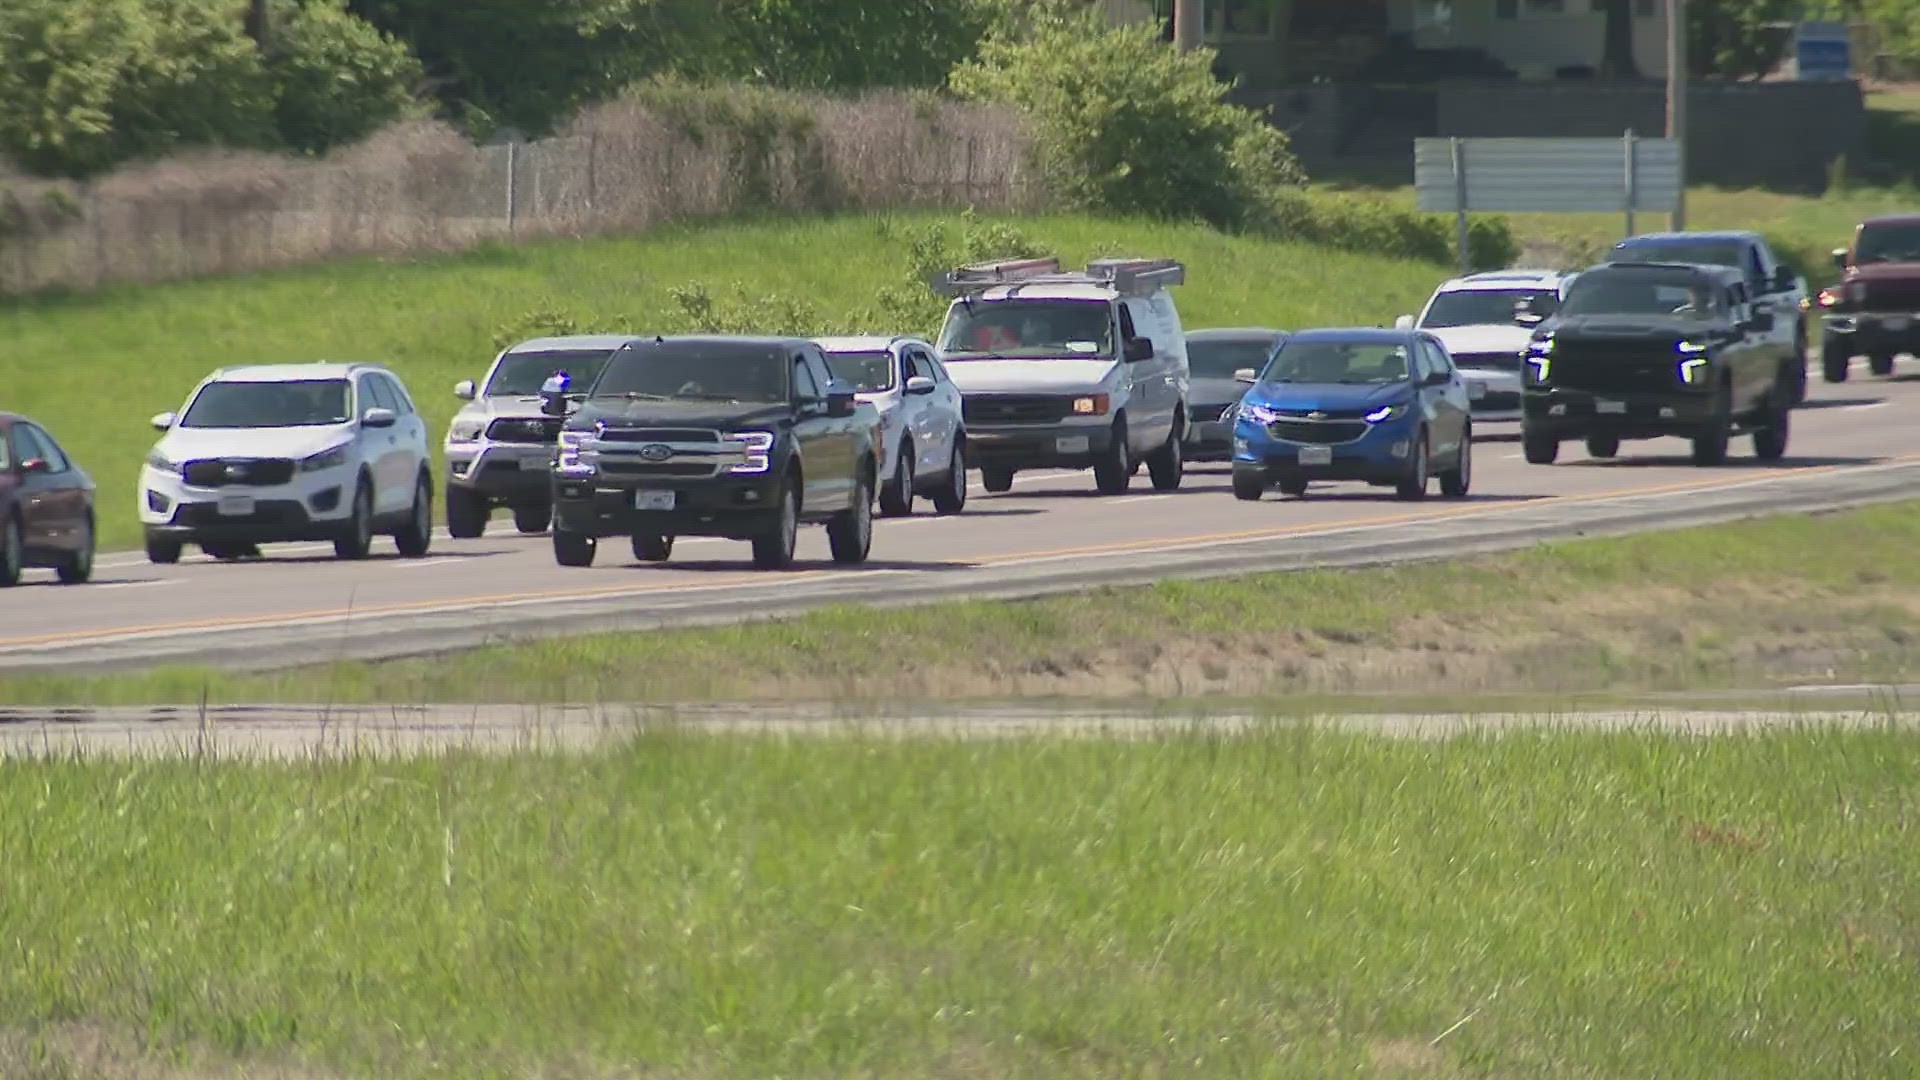 Since 2018, the Missouri State Highway Patrol has recorded 13 wrong-way driver crashes on Highway 21 in Jefferson County.